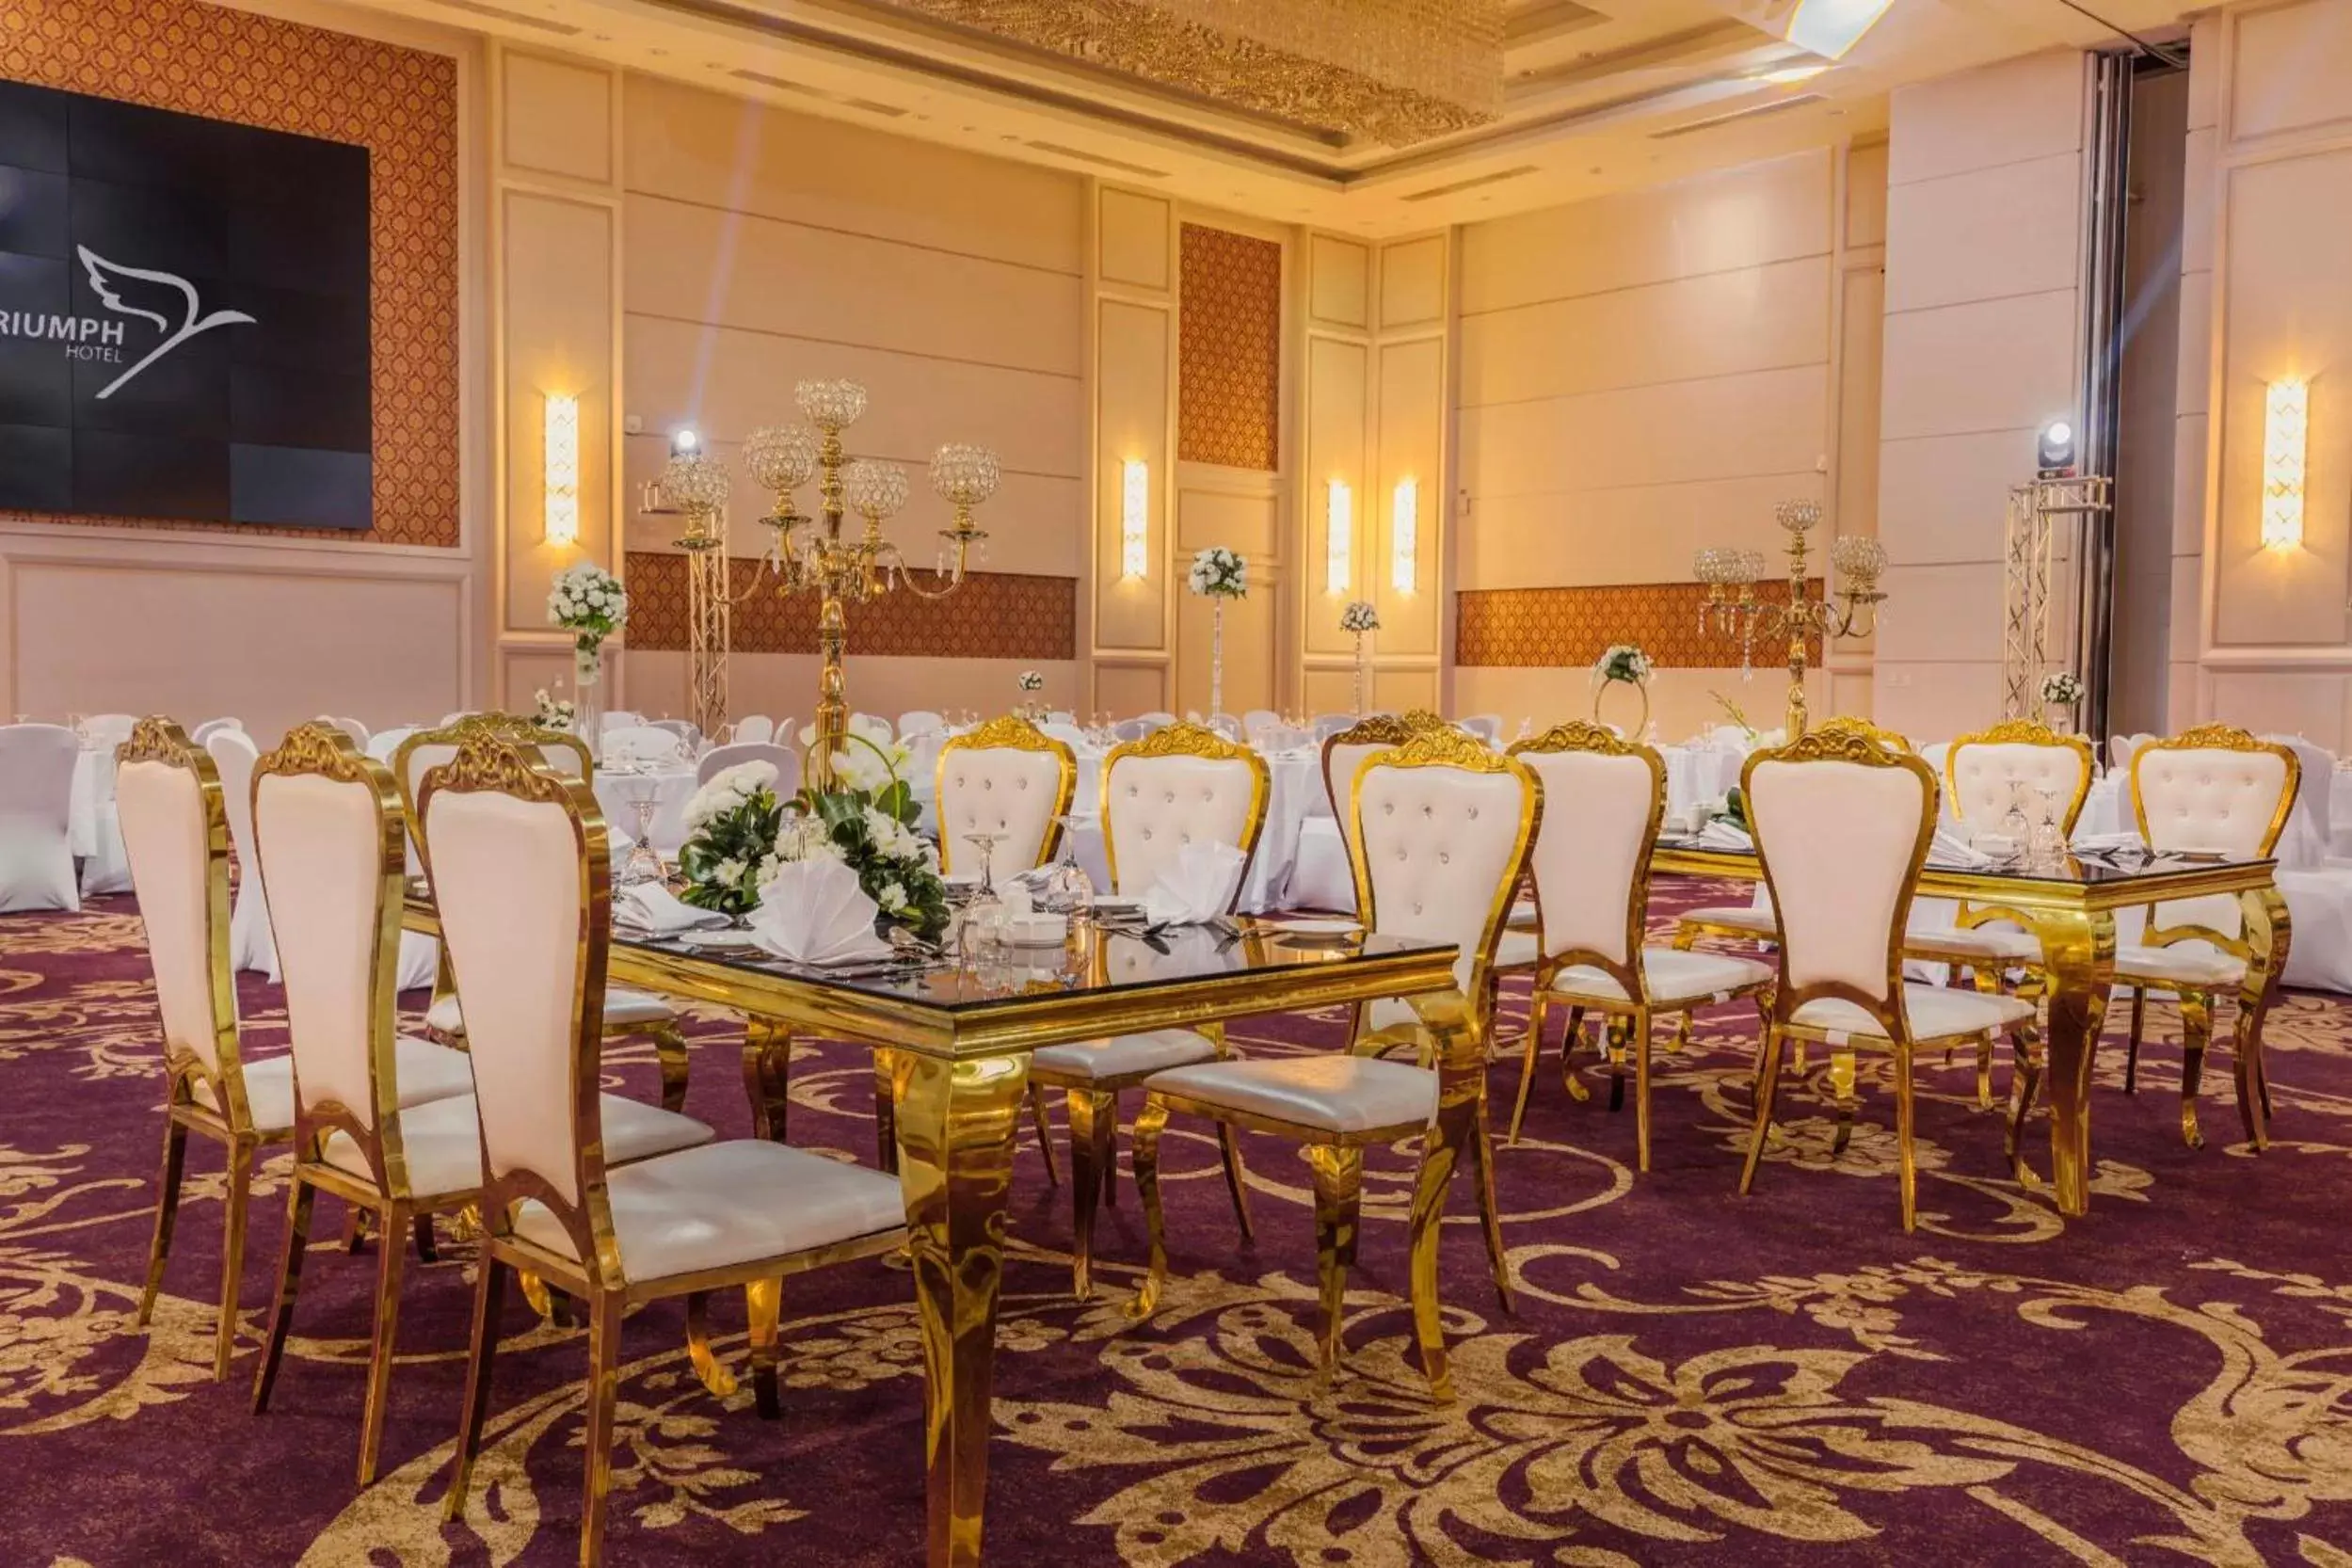 Meeting/conference room, Banquet Facilities in Triumph Luxury Hotel